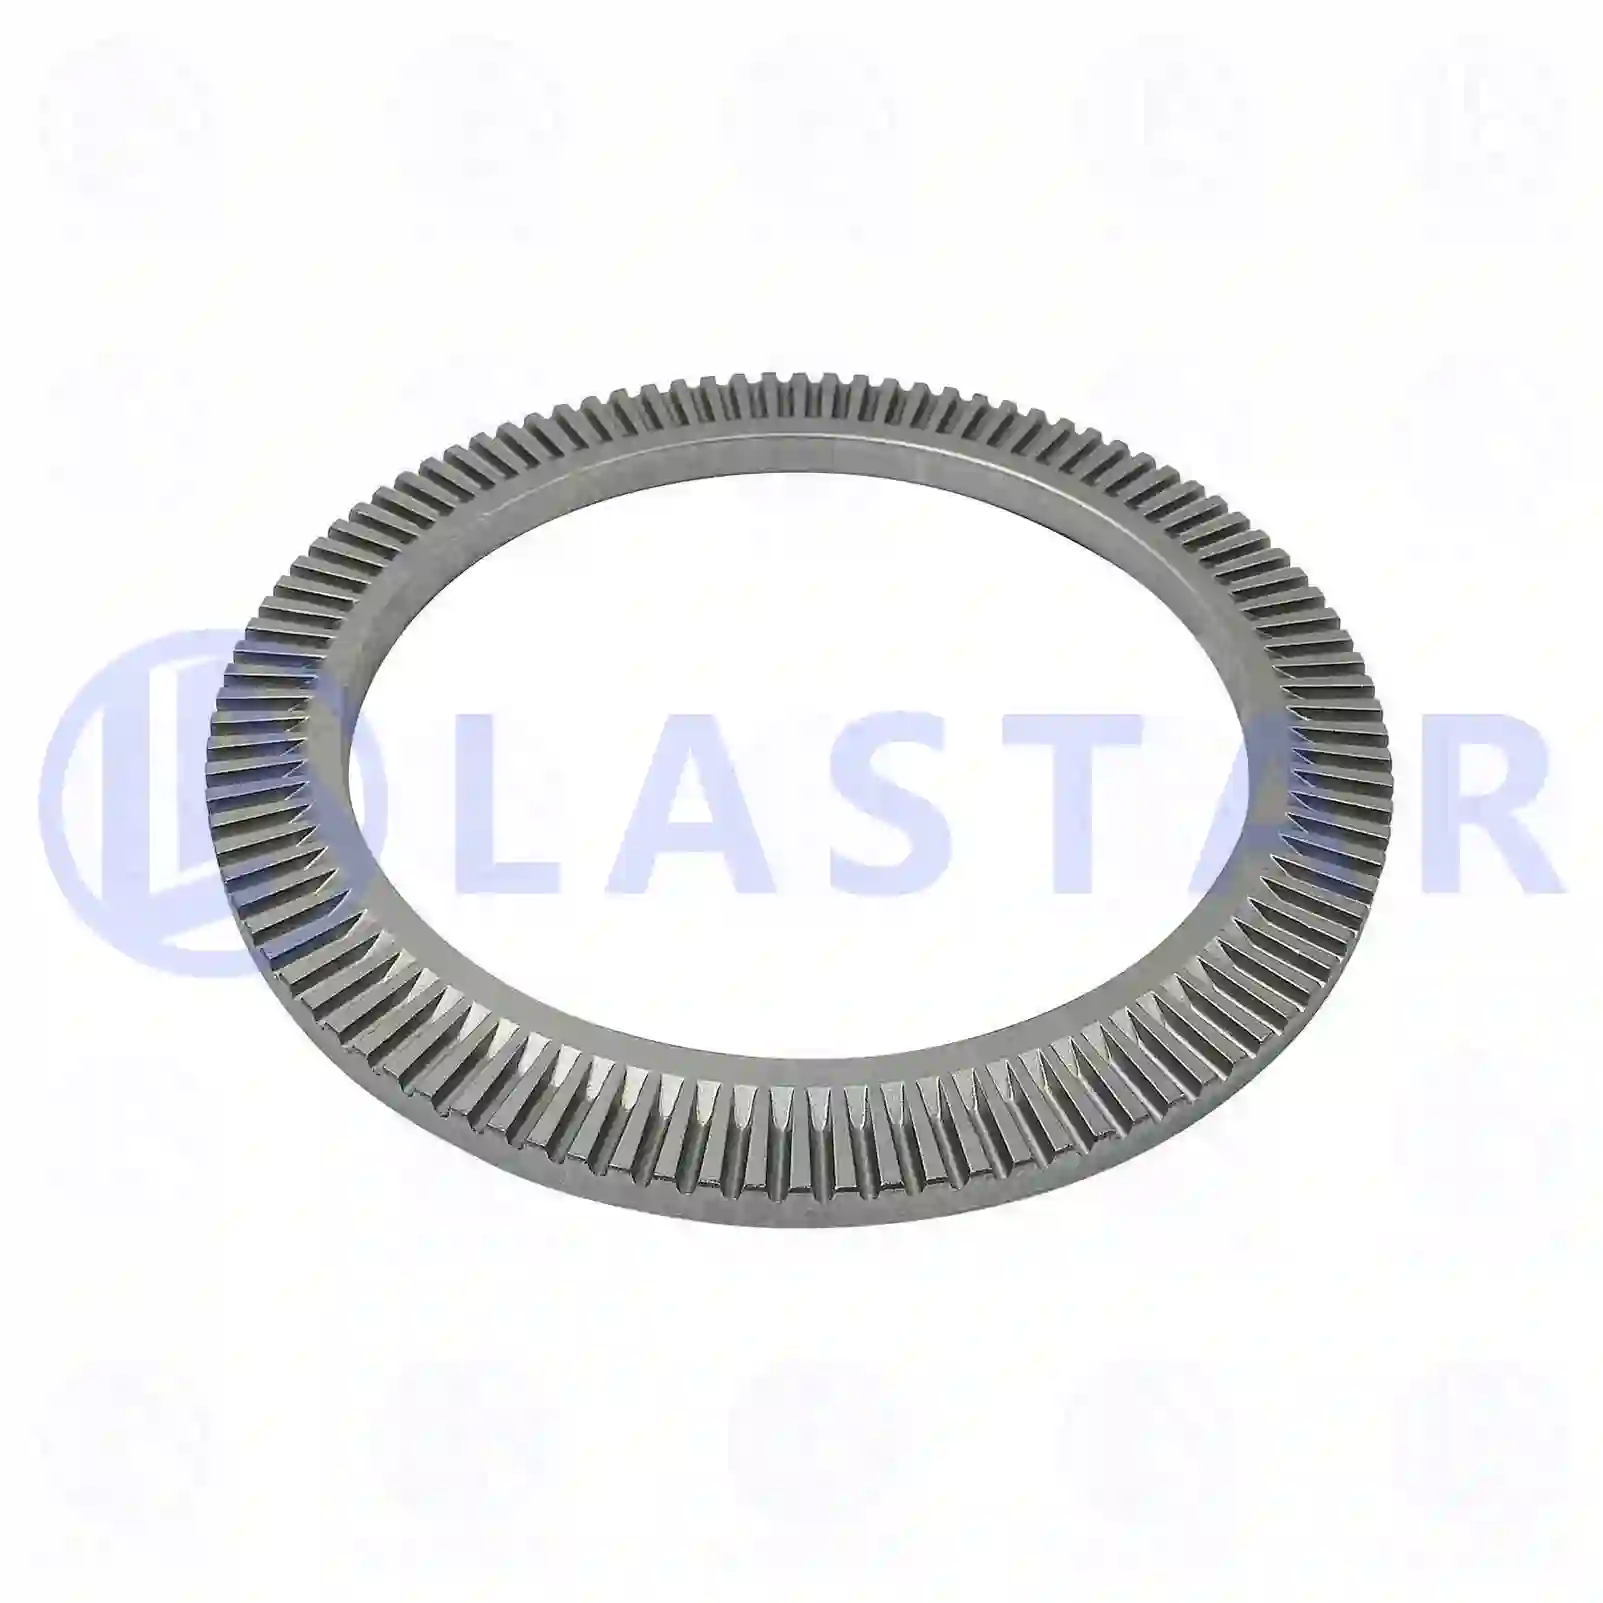 ABS ring, 77726877, 1339680, 1375382, ZG50004-0008 ||  77726877 Lastar Spare Part | Truck Spare Parts, Auotomotive Spare Parts ABS ring, 77726877, 1339680, 1375382, ZG50004-0008 ||  77726877 Lastar Spare Part | Truck Spare Parts, Auotomotive Spare Parts